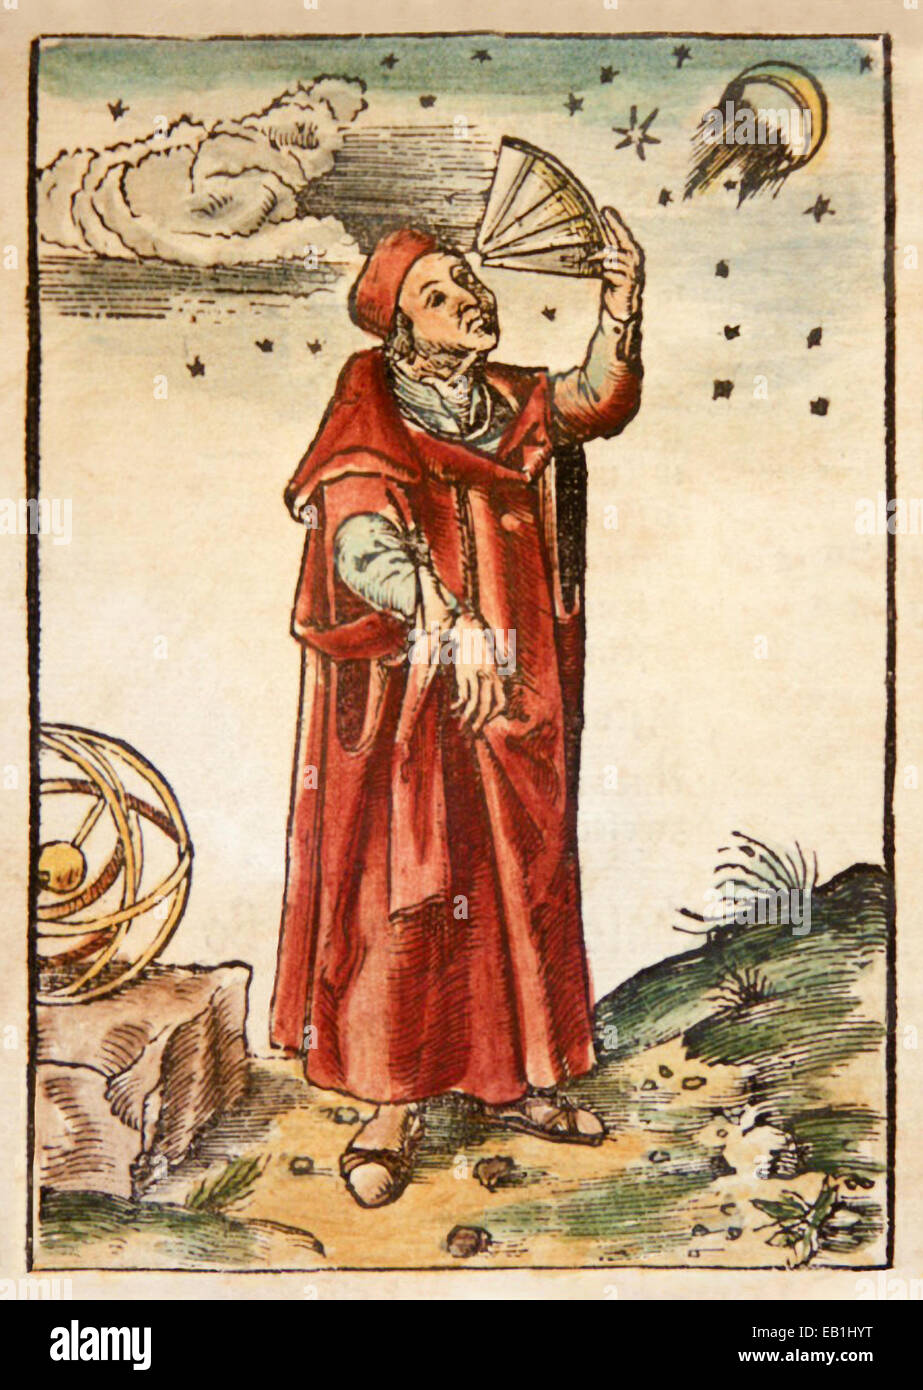 Woodcut portrait of Claudius Ptolemy (90-168AD), hand coloured from hand coloured edition of 'Cosmographia' by Sebastian Münster (first published 1544). This image from a later Latin edition published in 1552. Stock Photo